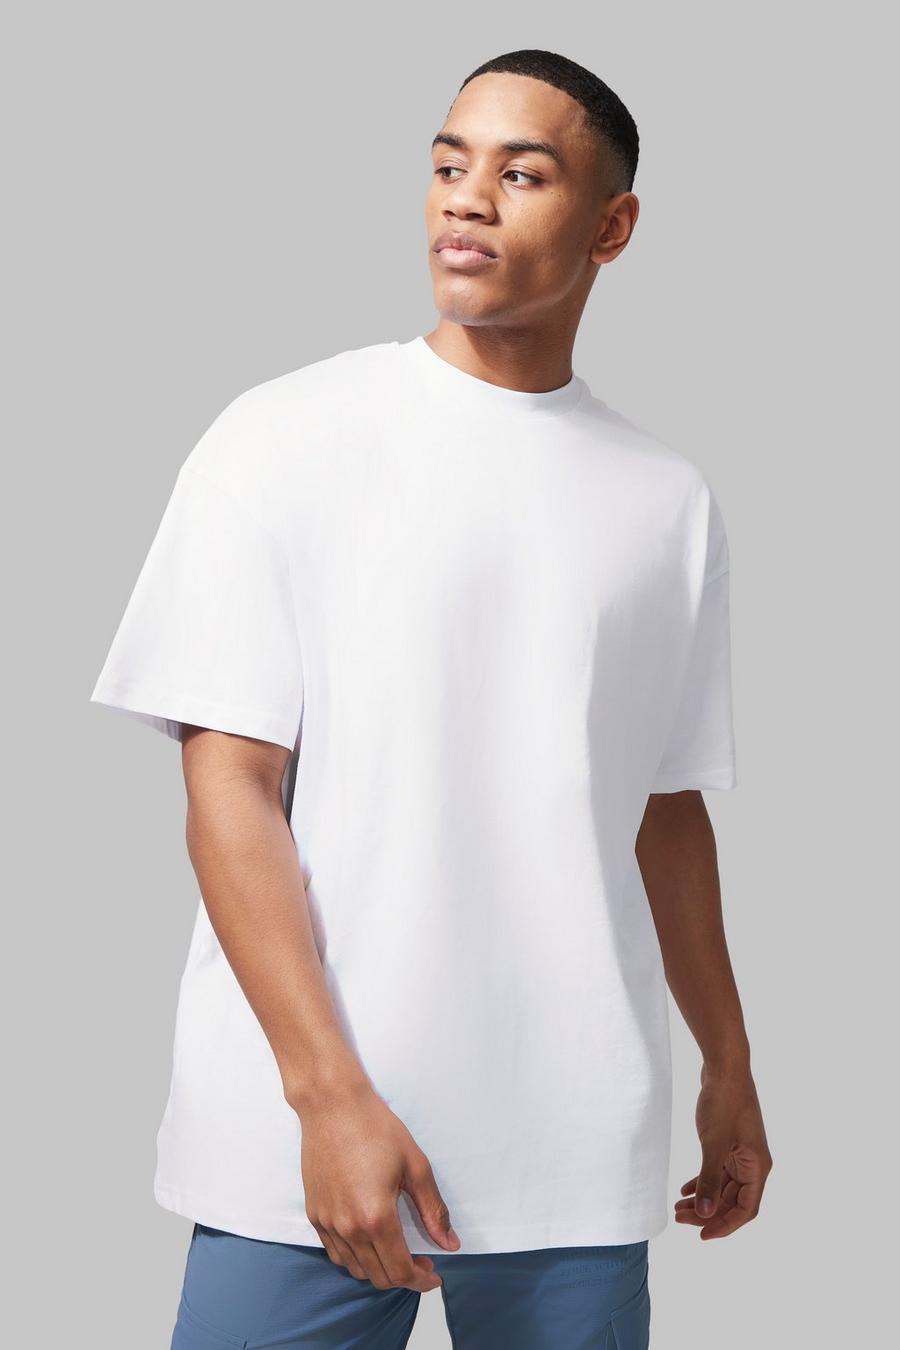 T-shirt Man Active Gym oversize con spacco laterale, White blanco